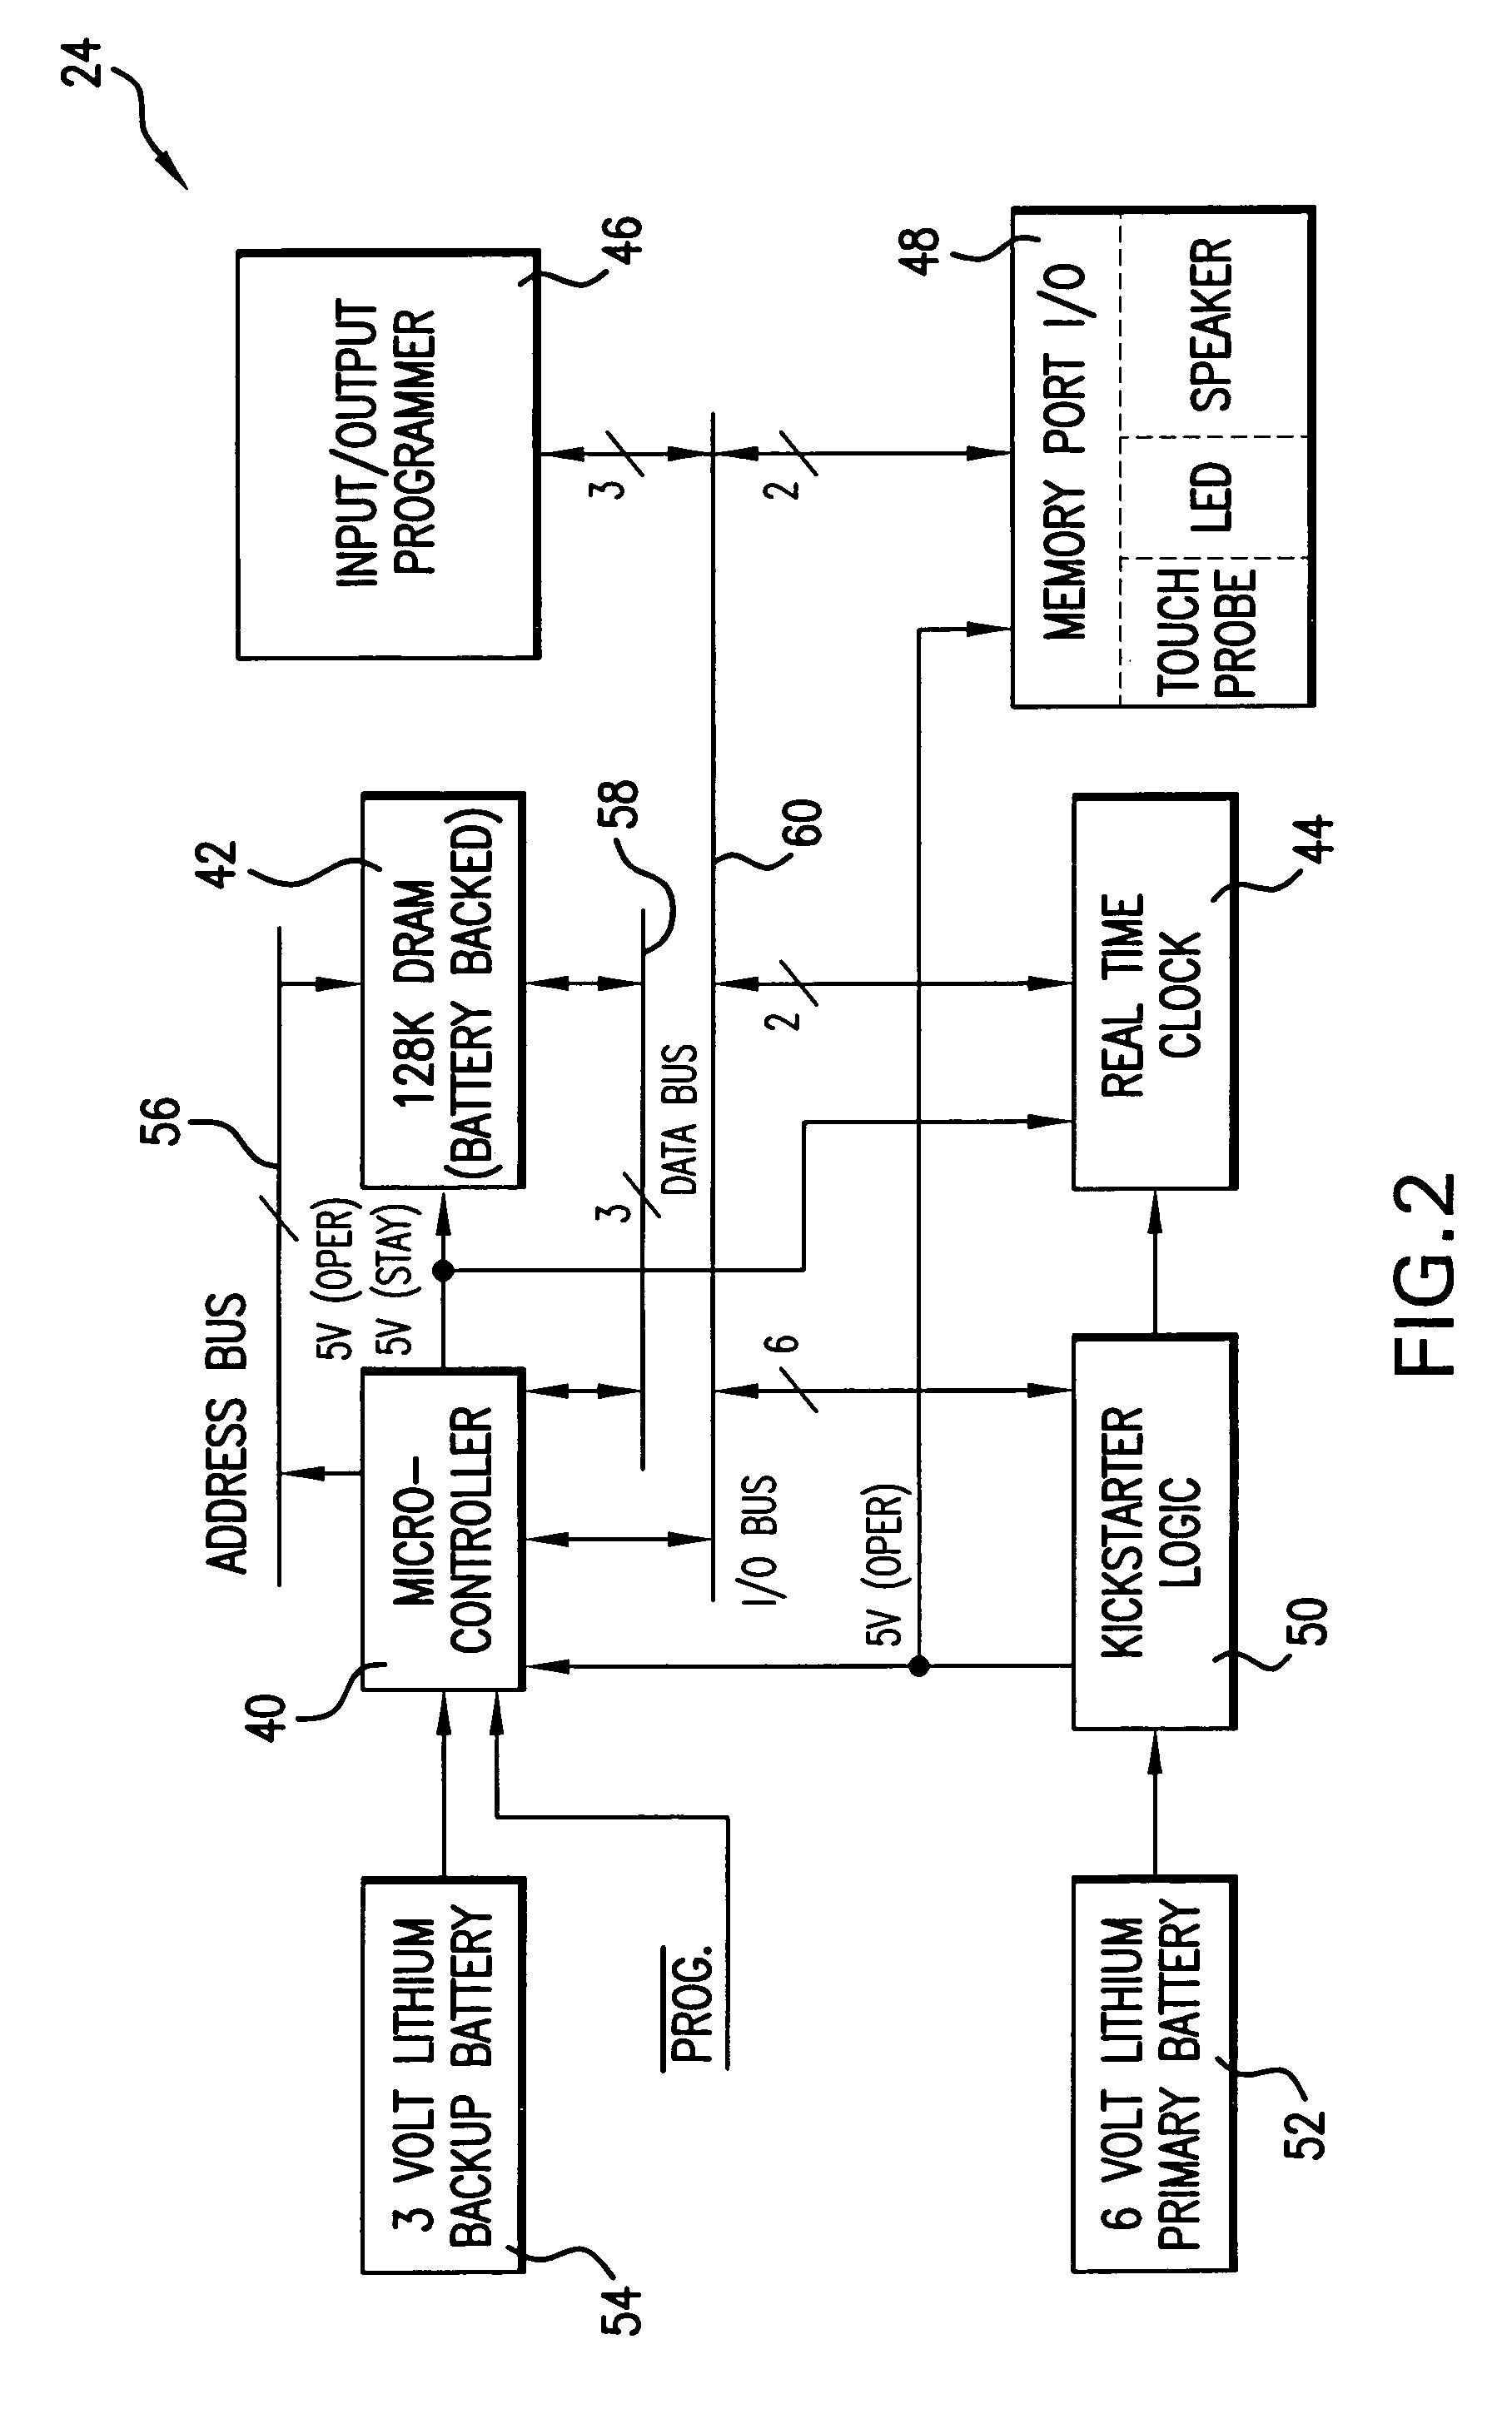 Guard tour system incorporating a positioning system